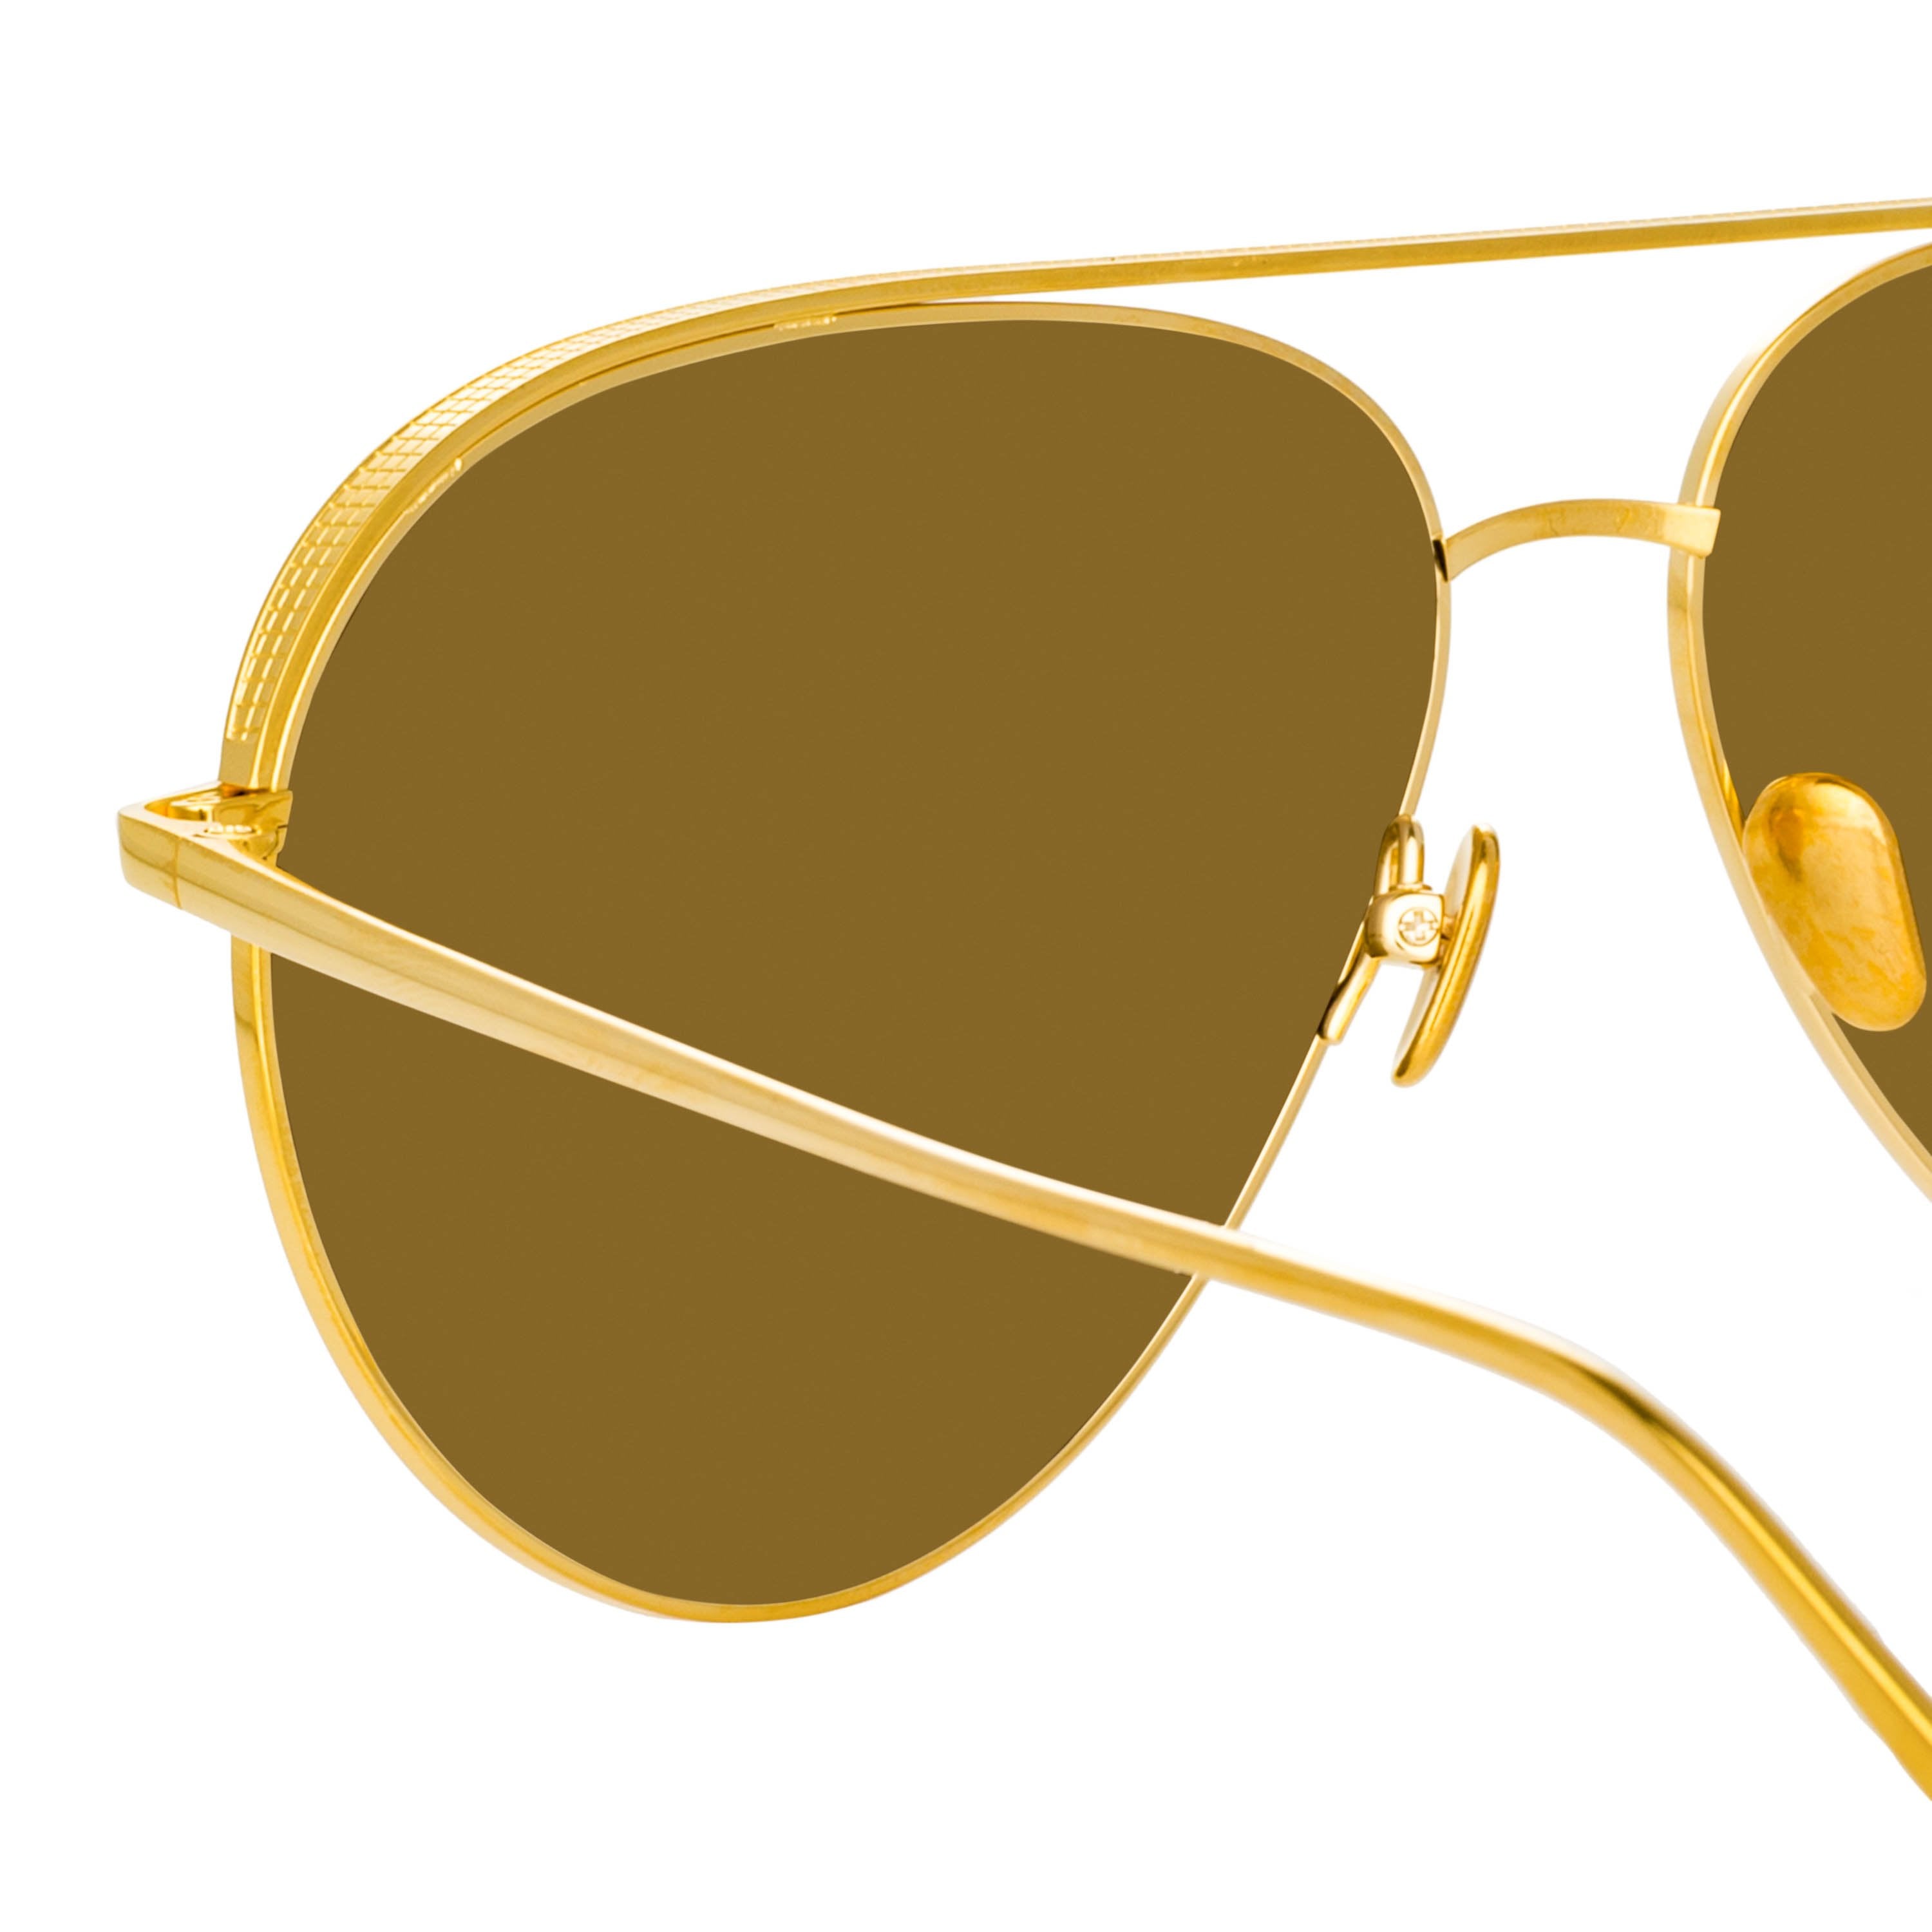 Color_LFL1078C2SUN - Roberts Aviator Sunglasses in Yellow Gold and Gold Lenses